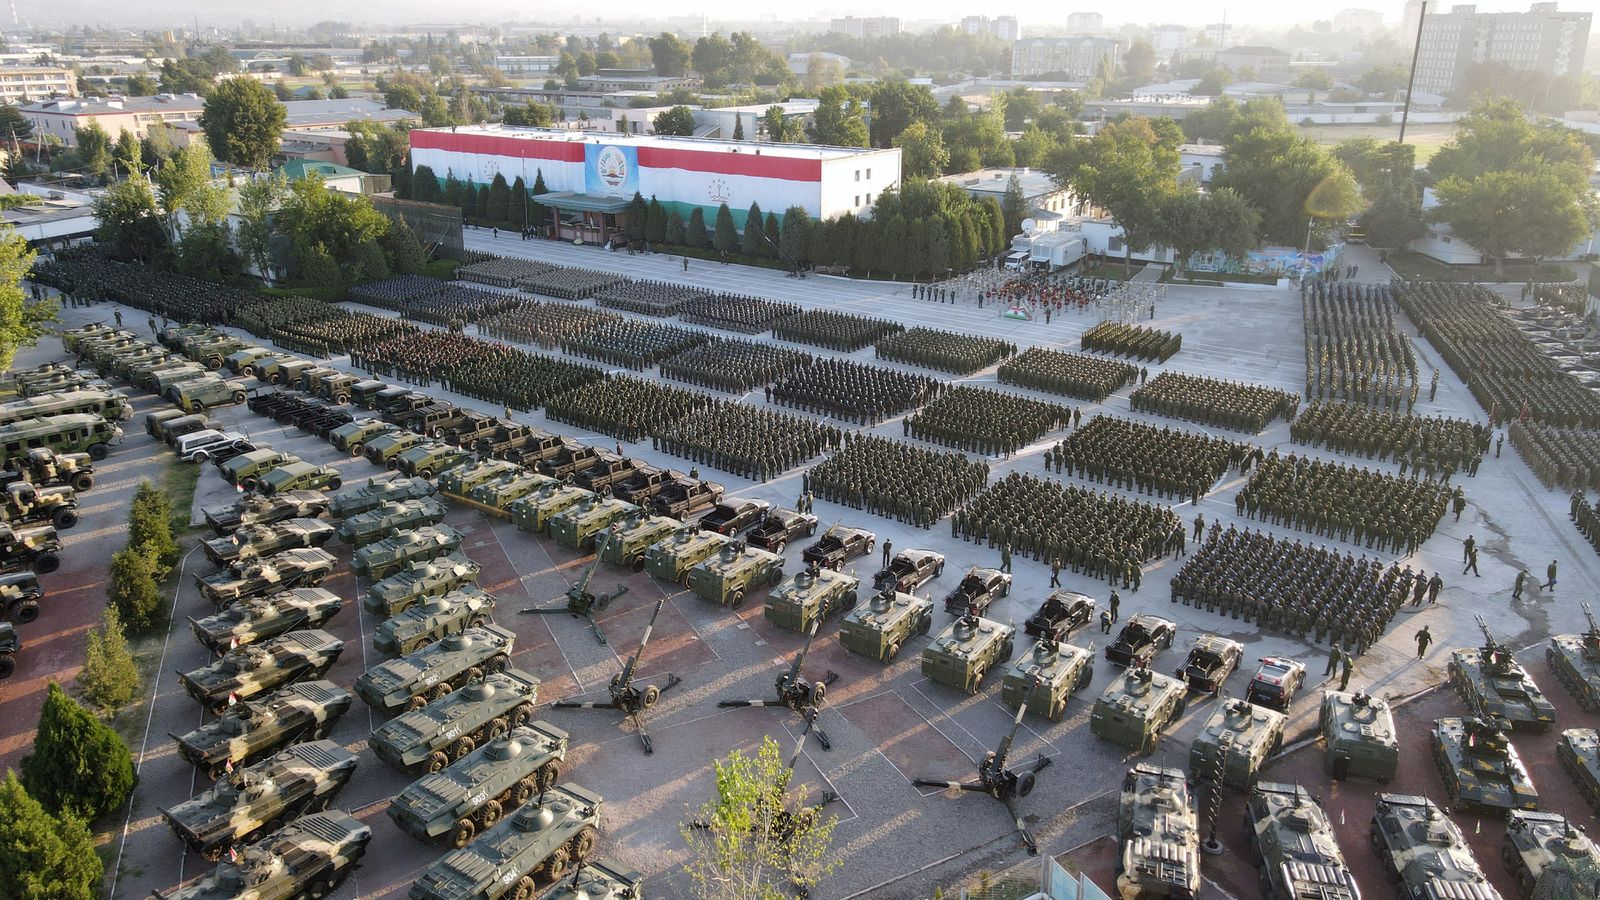 A general view of a military parade in Dushanbe - via REUTERS